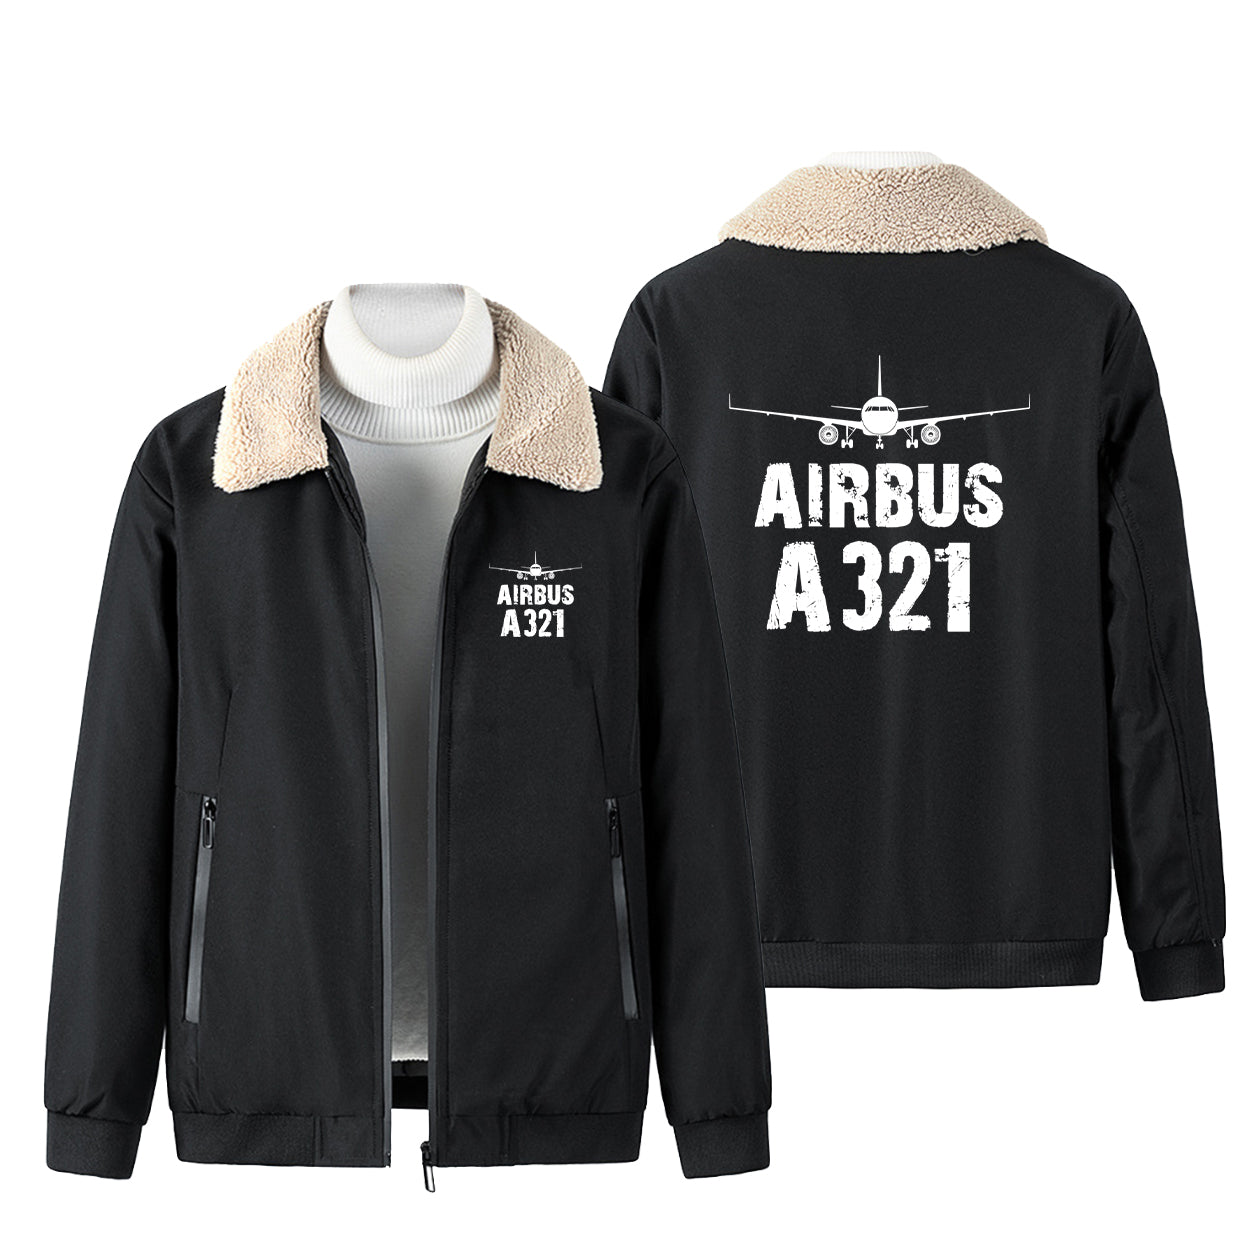 Airbus A321 & Plane Designed Winter Bomber Jackets